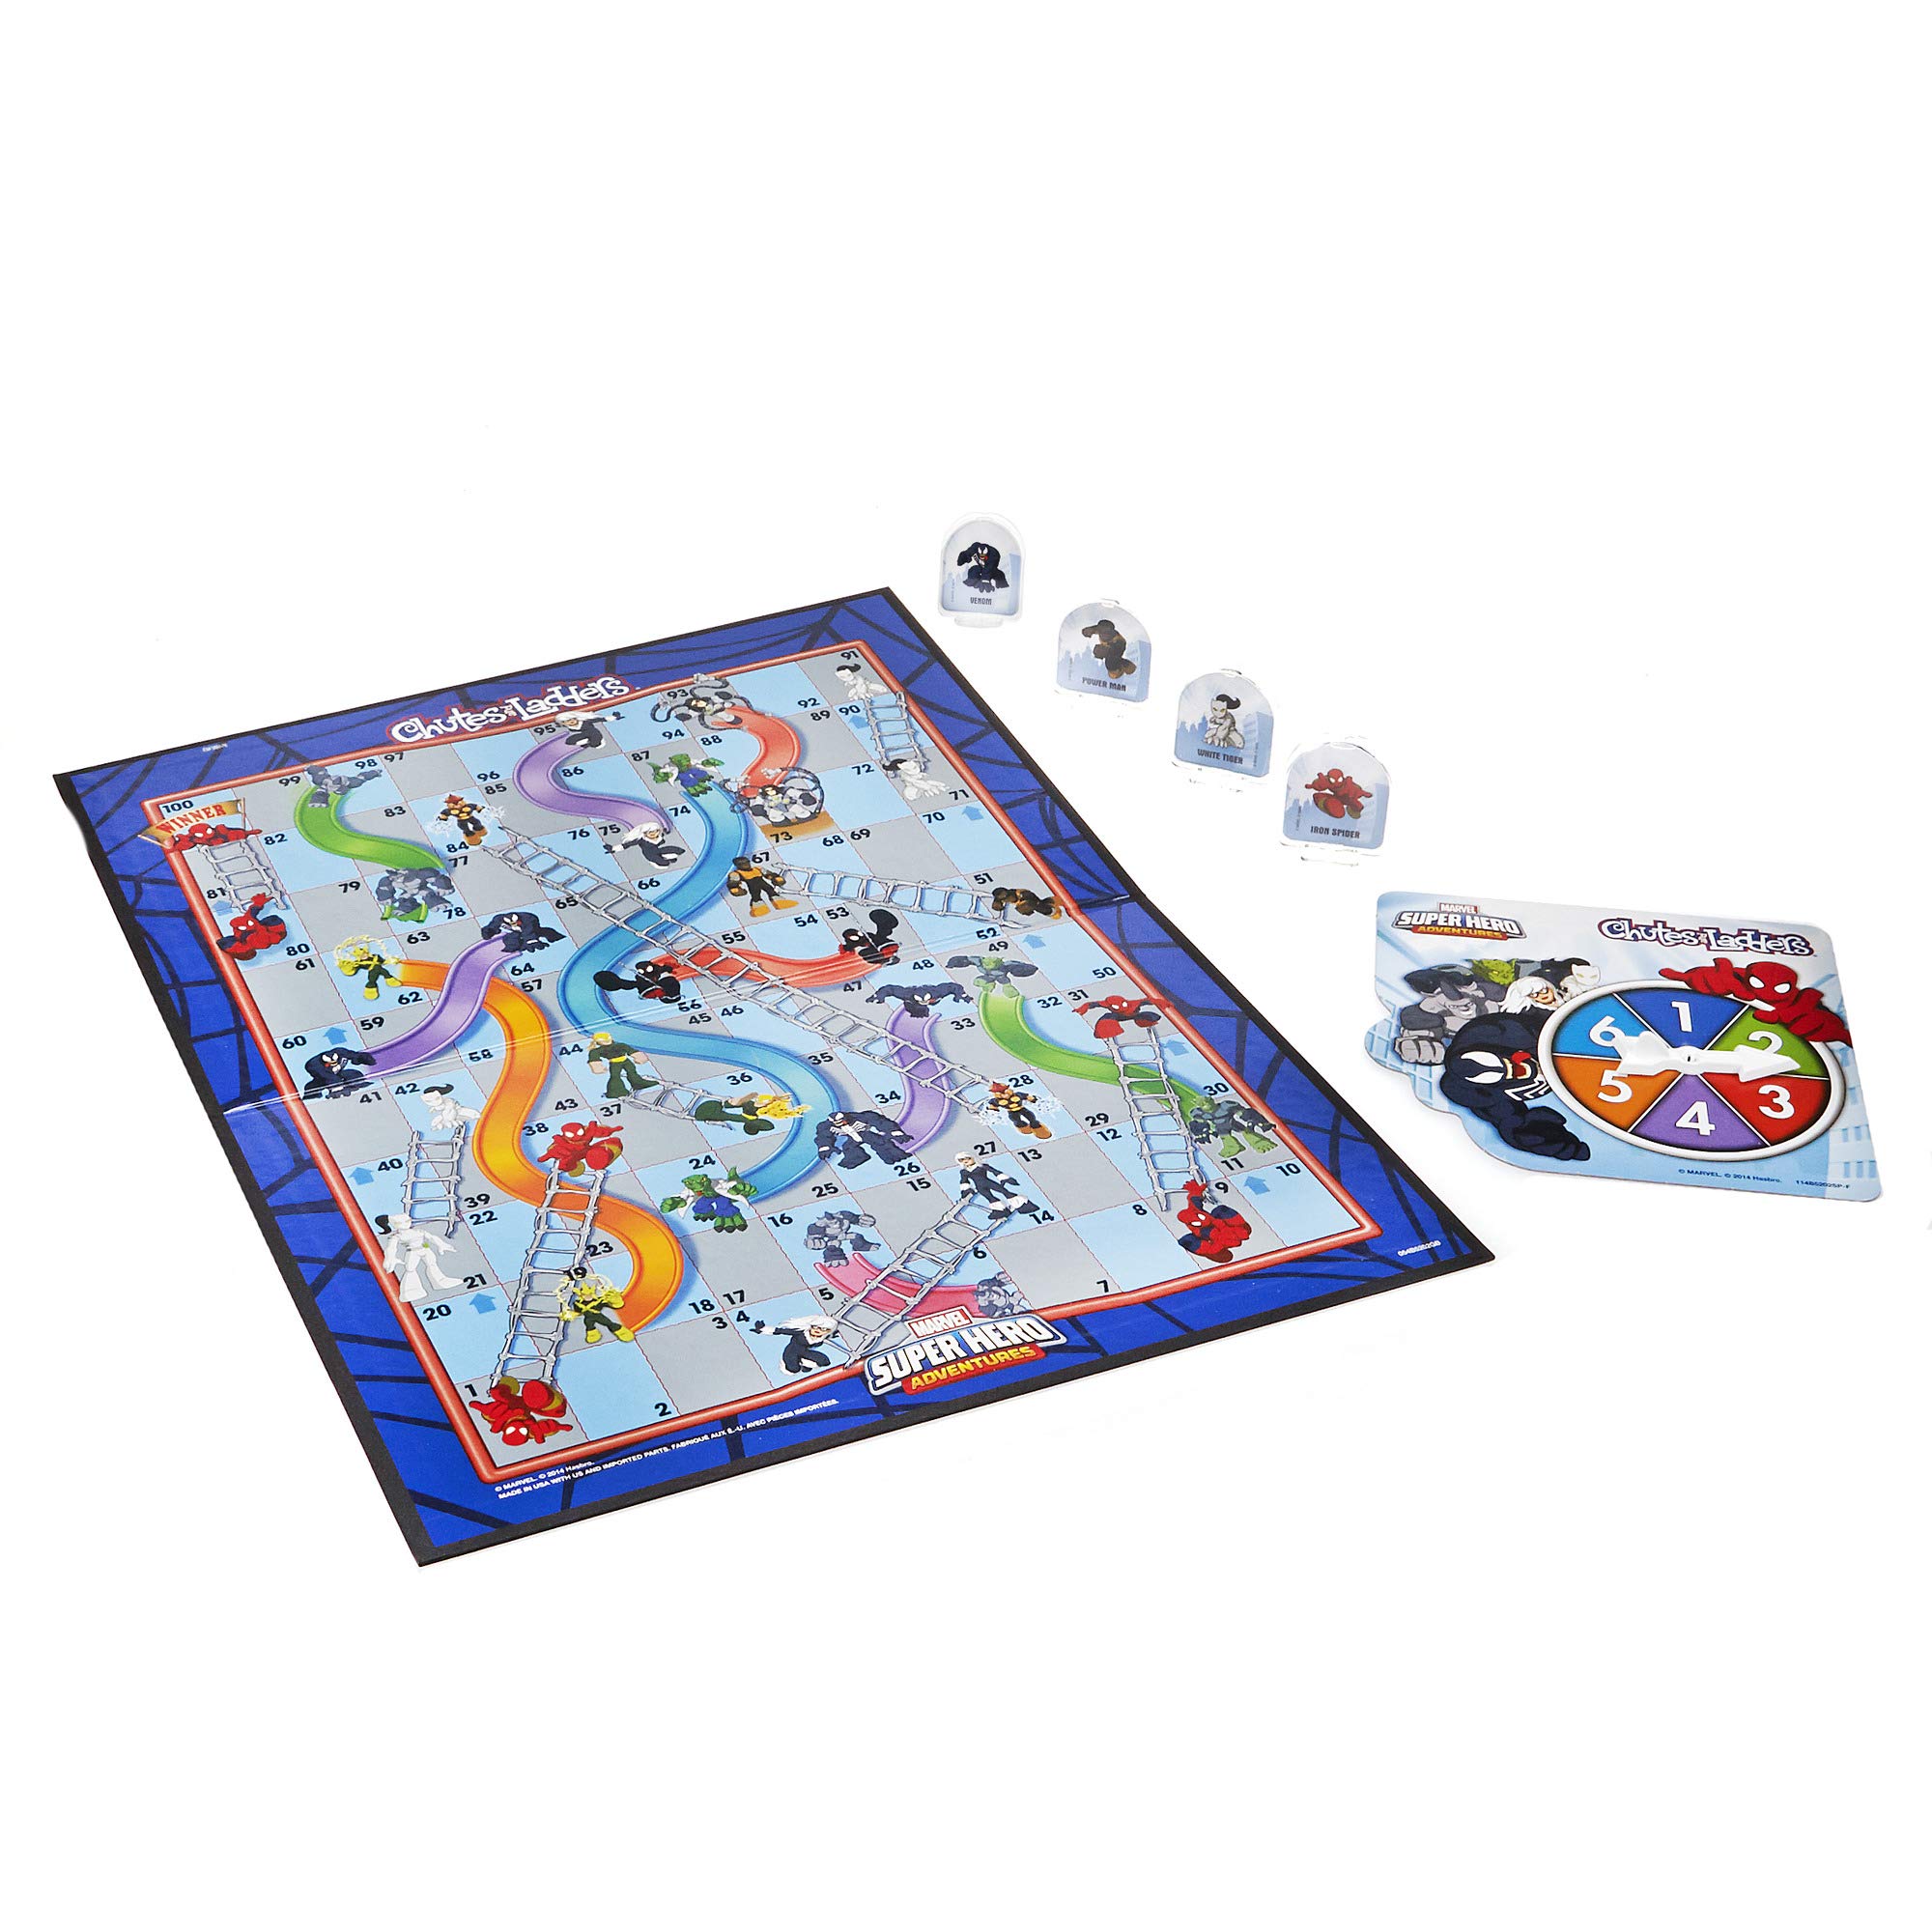 Hasbro Gaming Marvel Spider-Man Web Warriors Chutes & Ladders Game (Amazon Exclusive) for 3+ Years, Includes Gameboard, spinner with arrow and base, 8 character pawns, 4 pawn stands, and instructions.